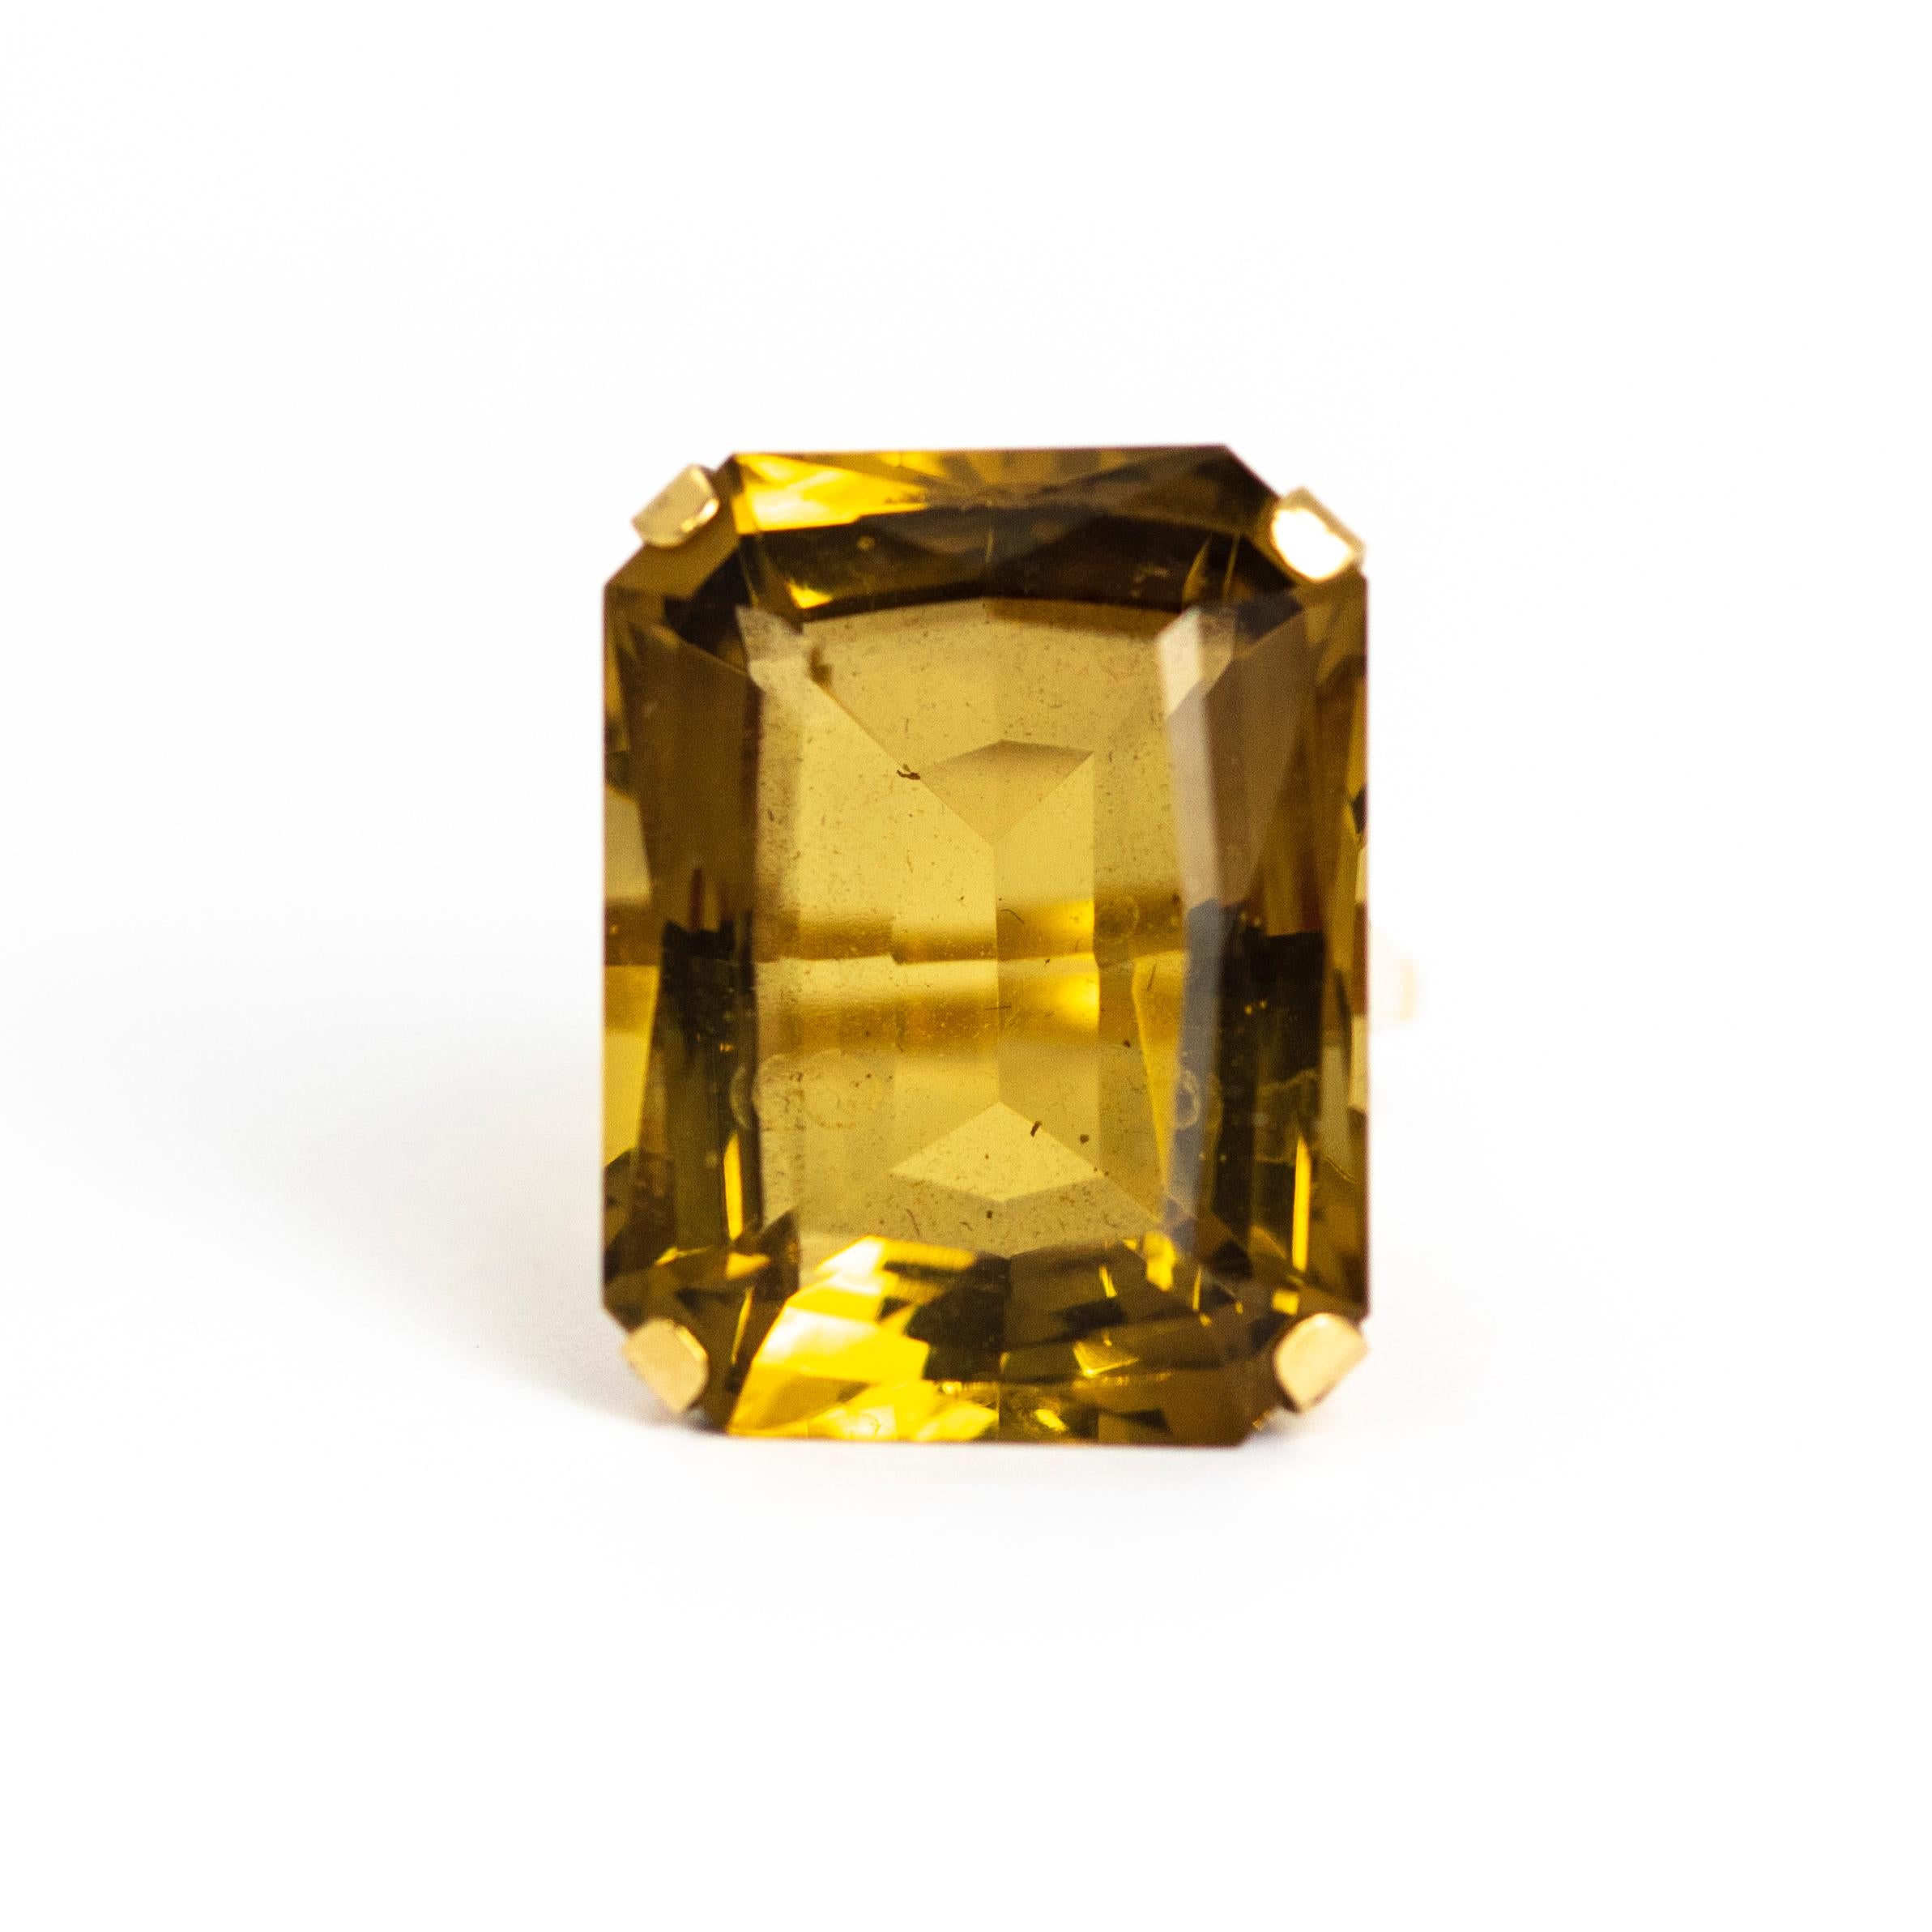 The glistening citrine in this ring is deep in colour and huge! The stone sits on top of a tall openwork setting which is quite geometric on style and the band is quite delicate for the size of the ring but works perfectly. Made in London, England.